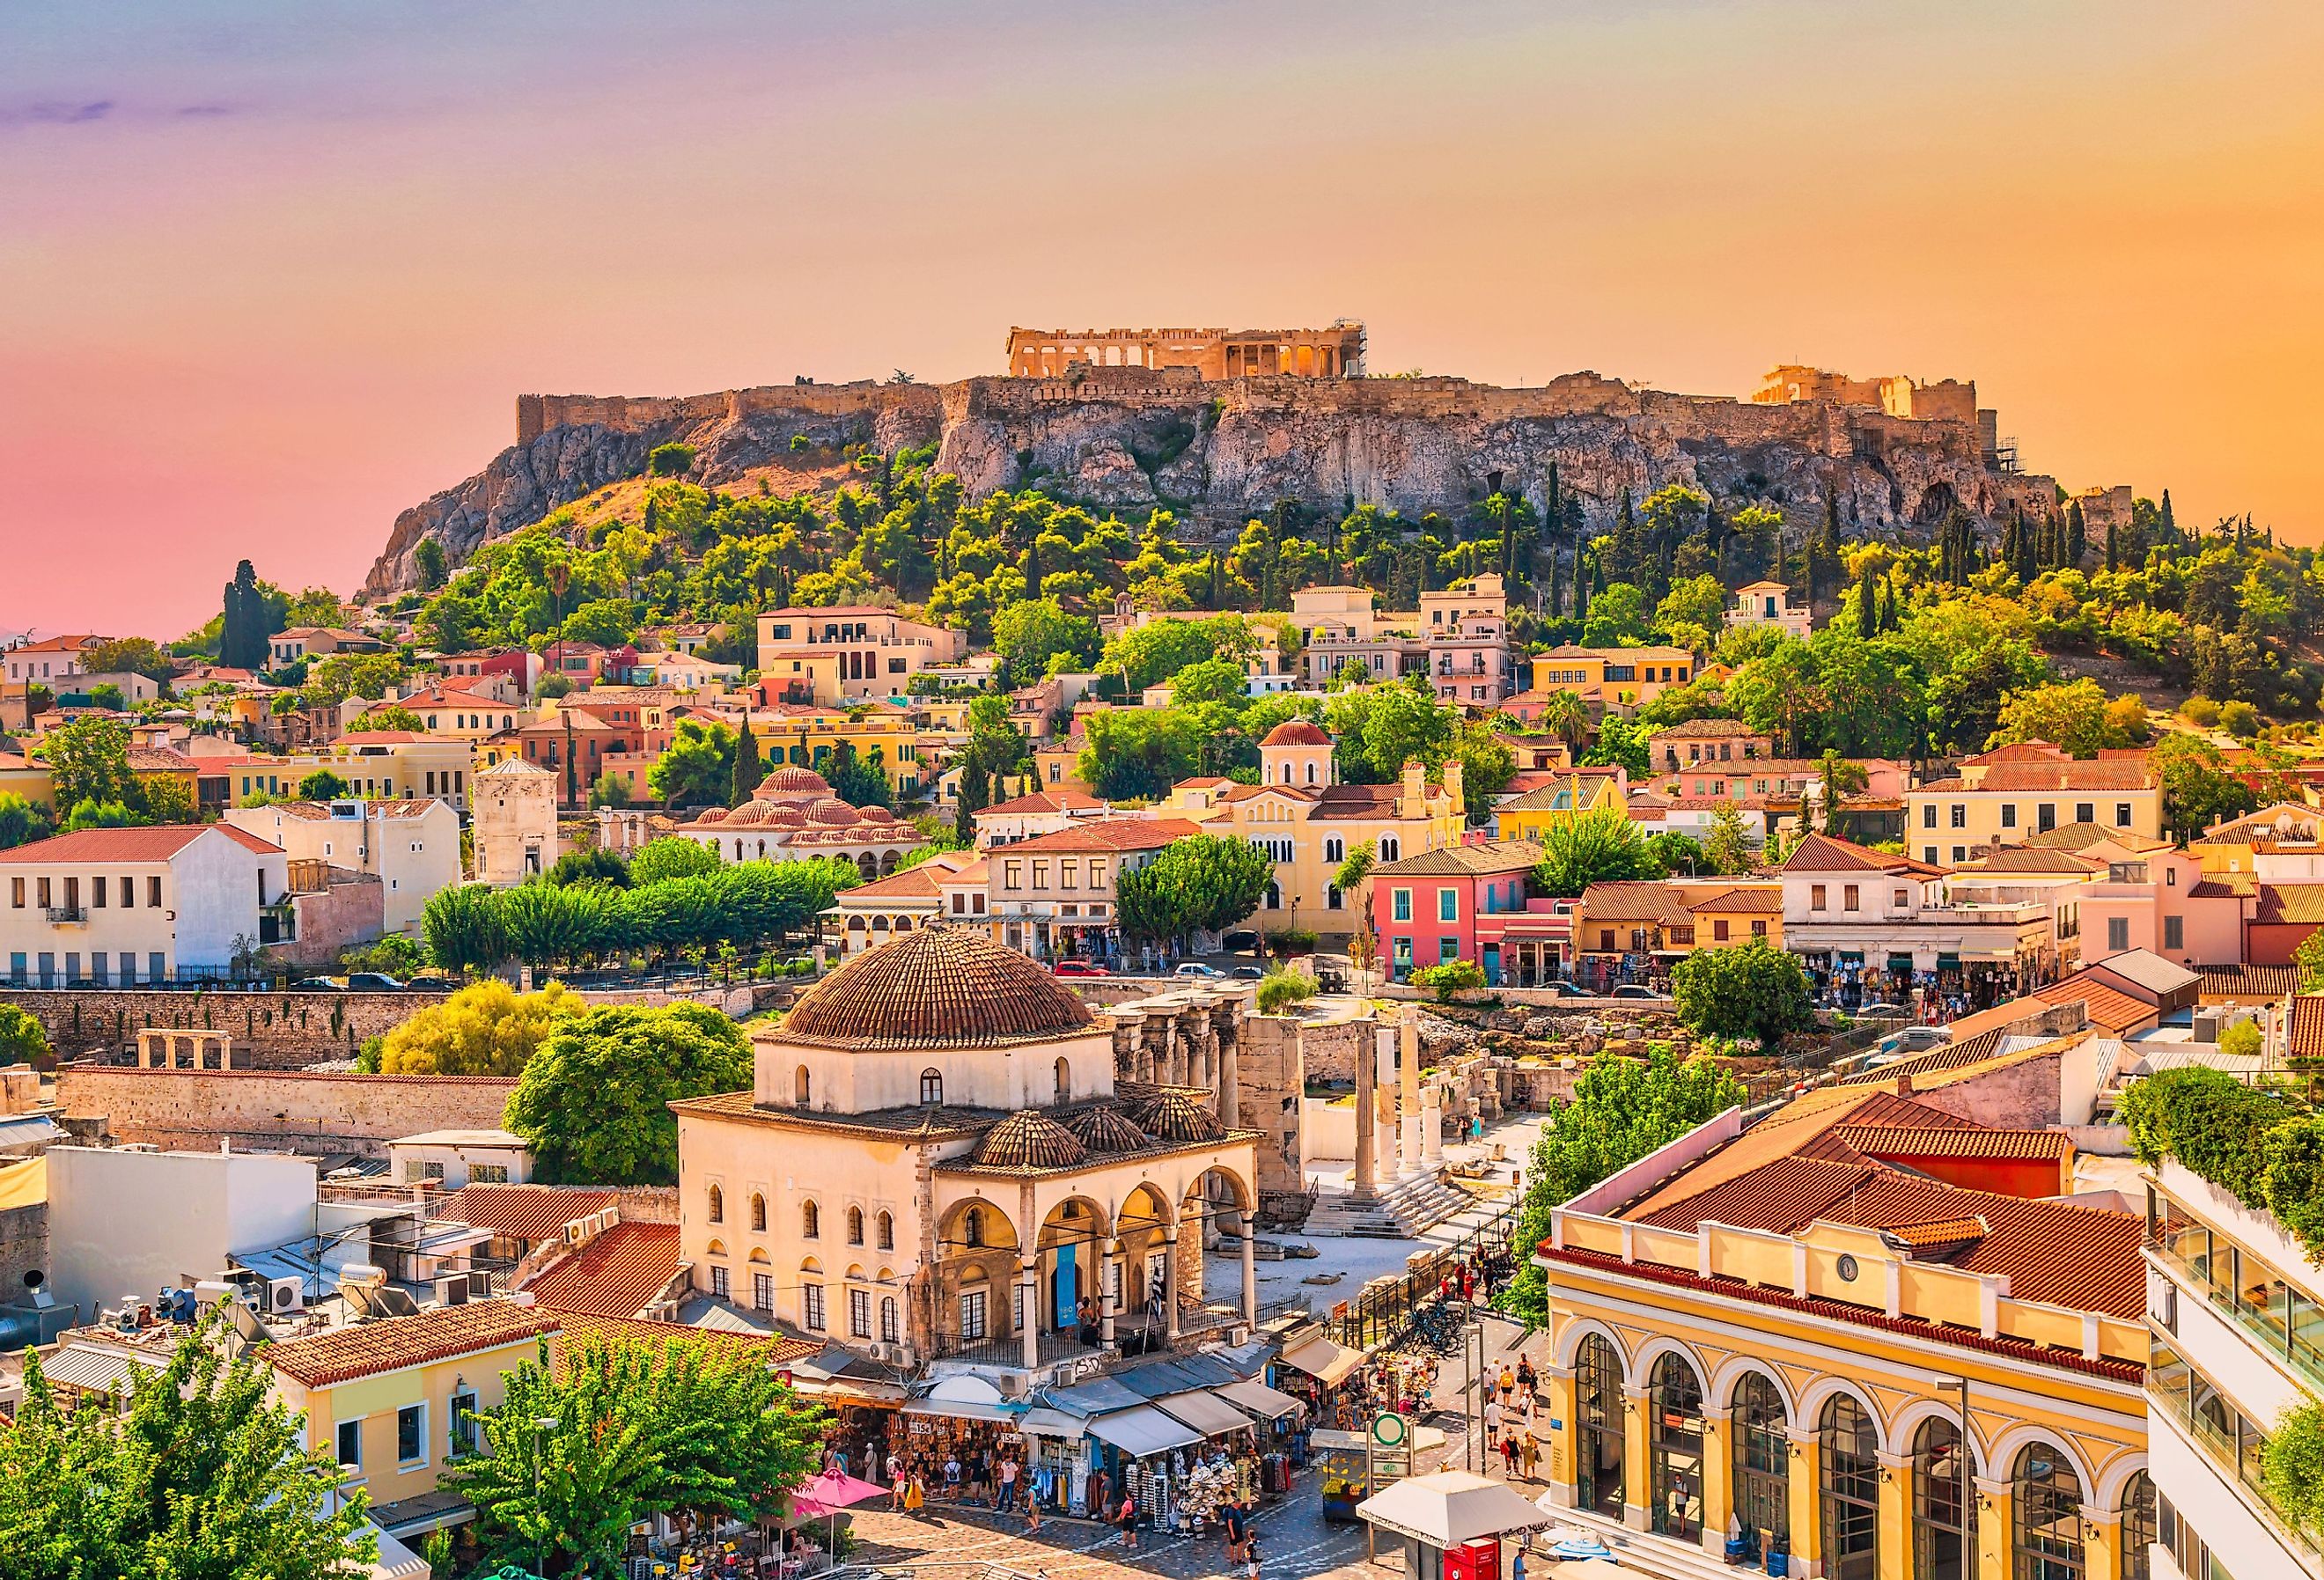 Athens and Acropolis hill, the new and the old. Image credit Nick N A via Shutterstock